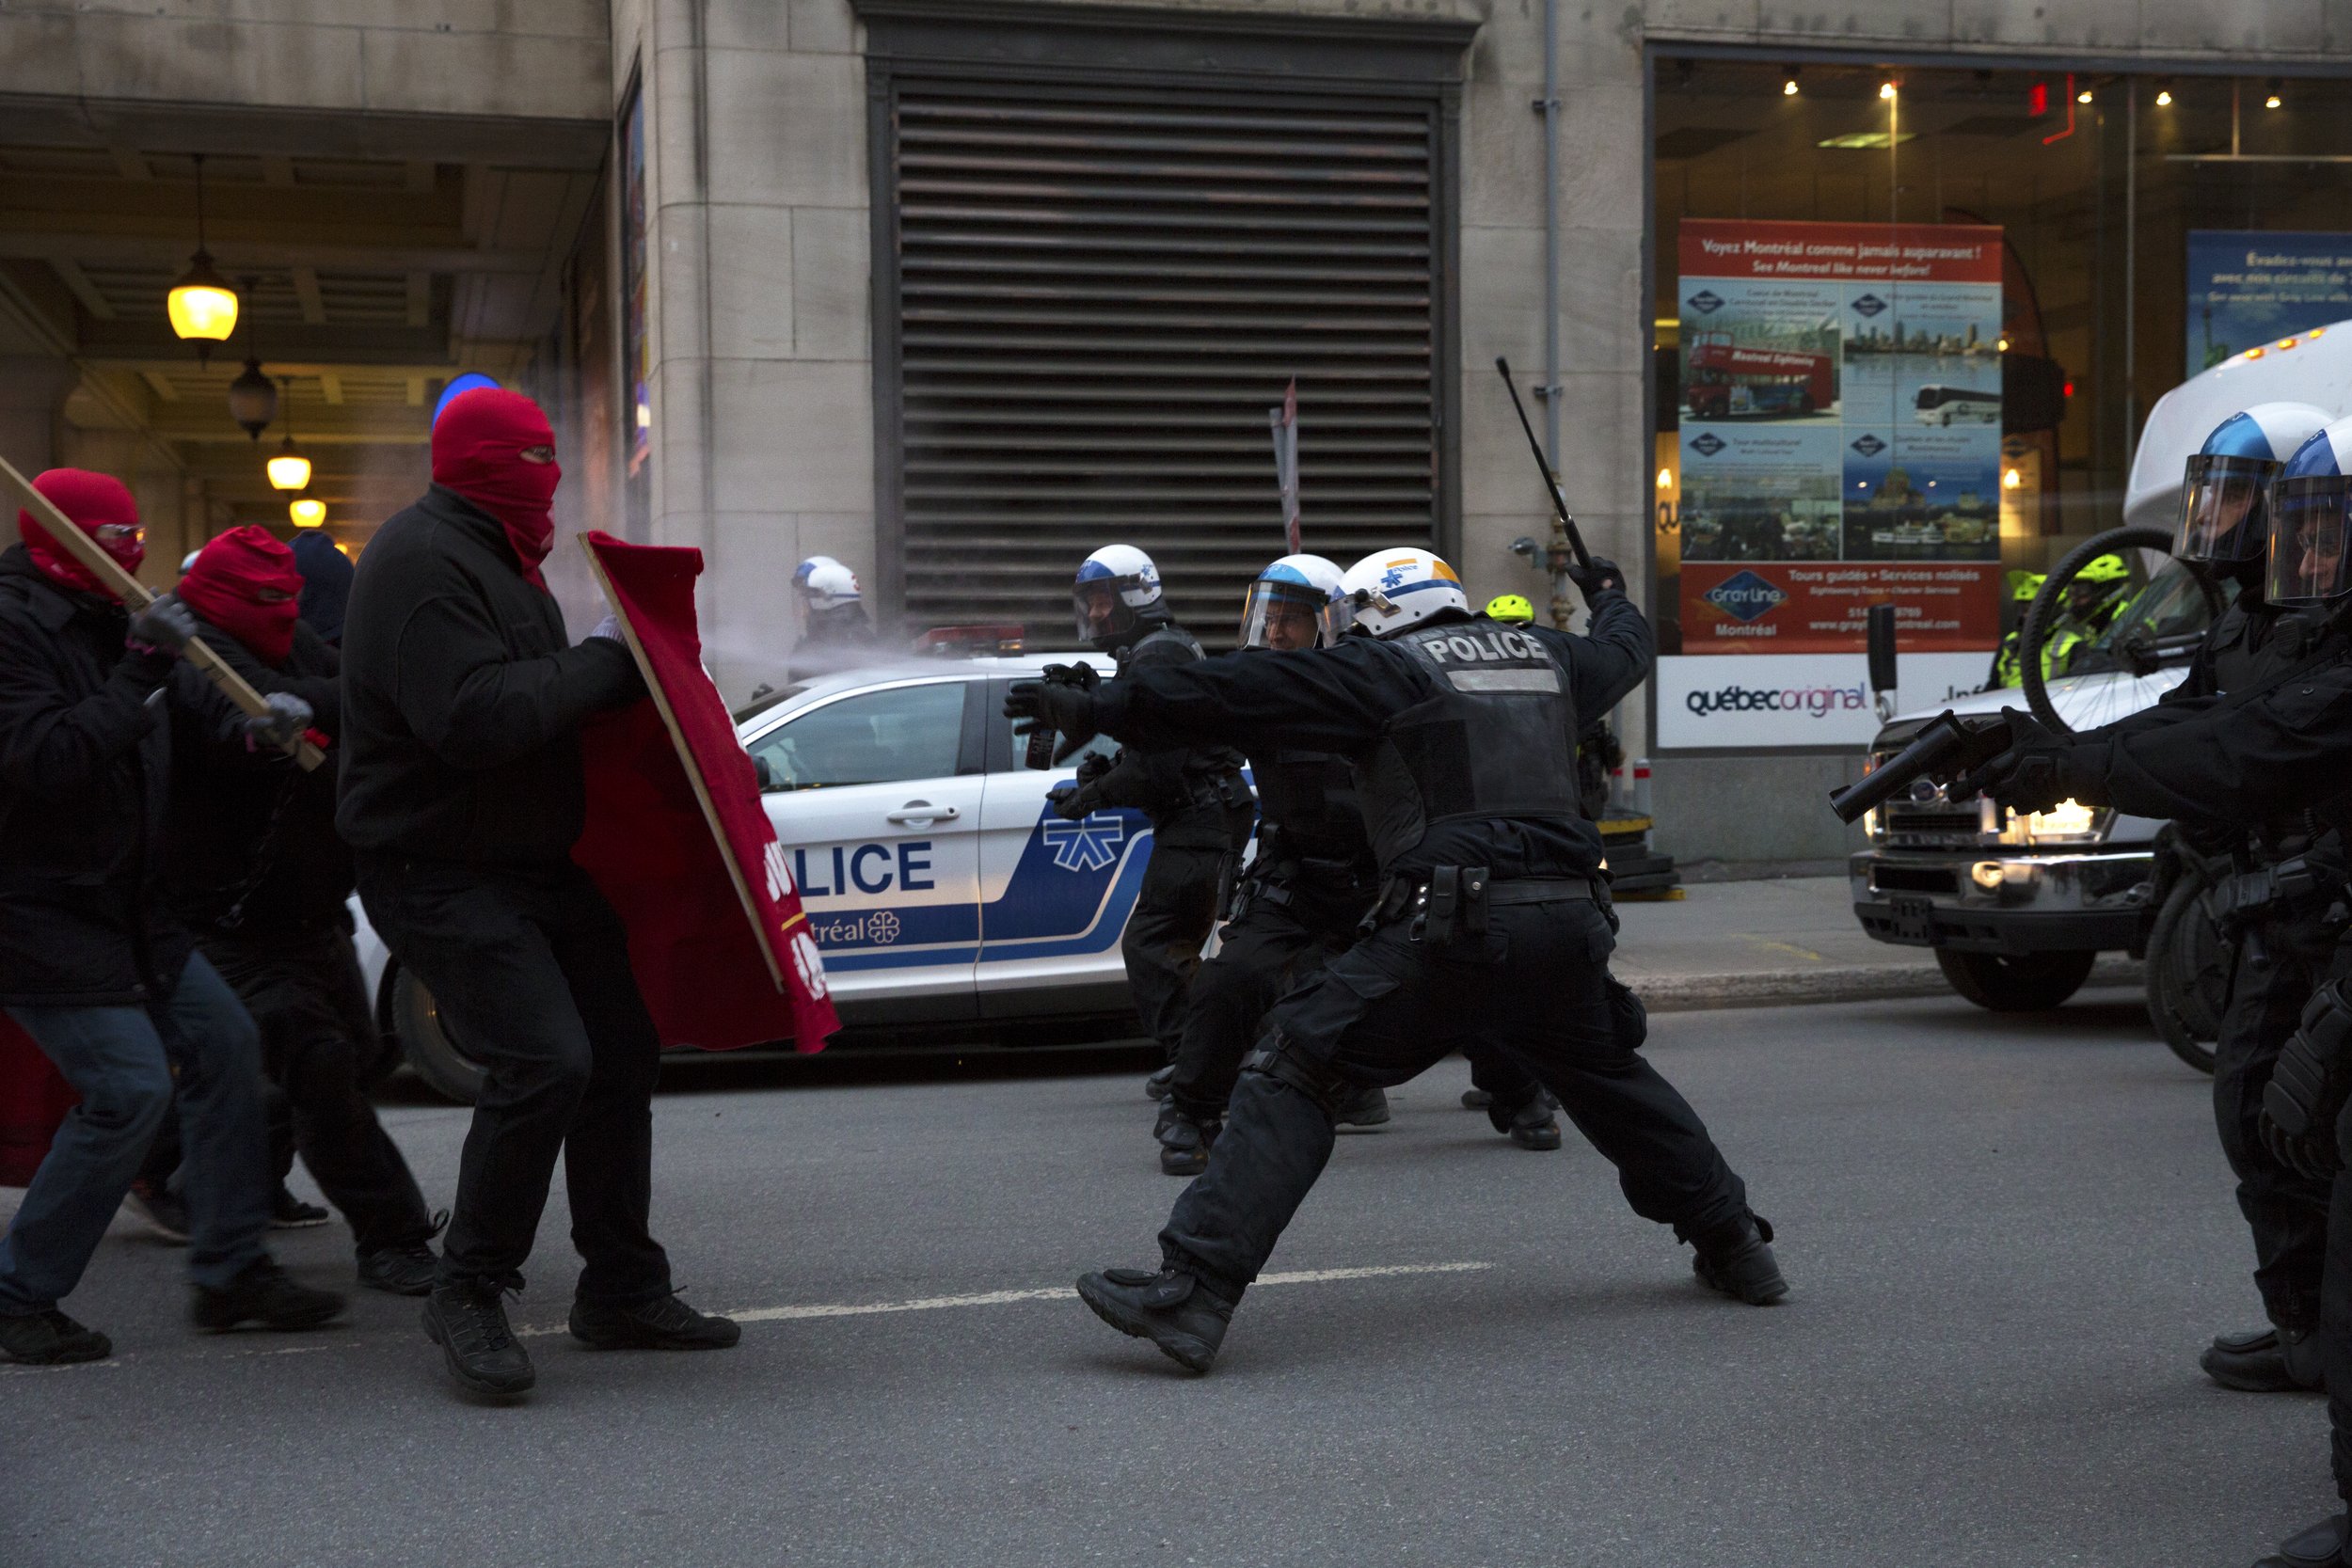  Demonstrators and SPVM fighting in the streets during May Day demonstrations. May 1 2018.  